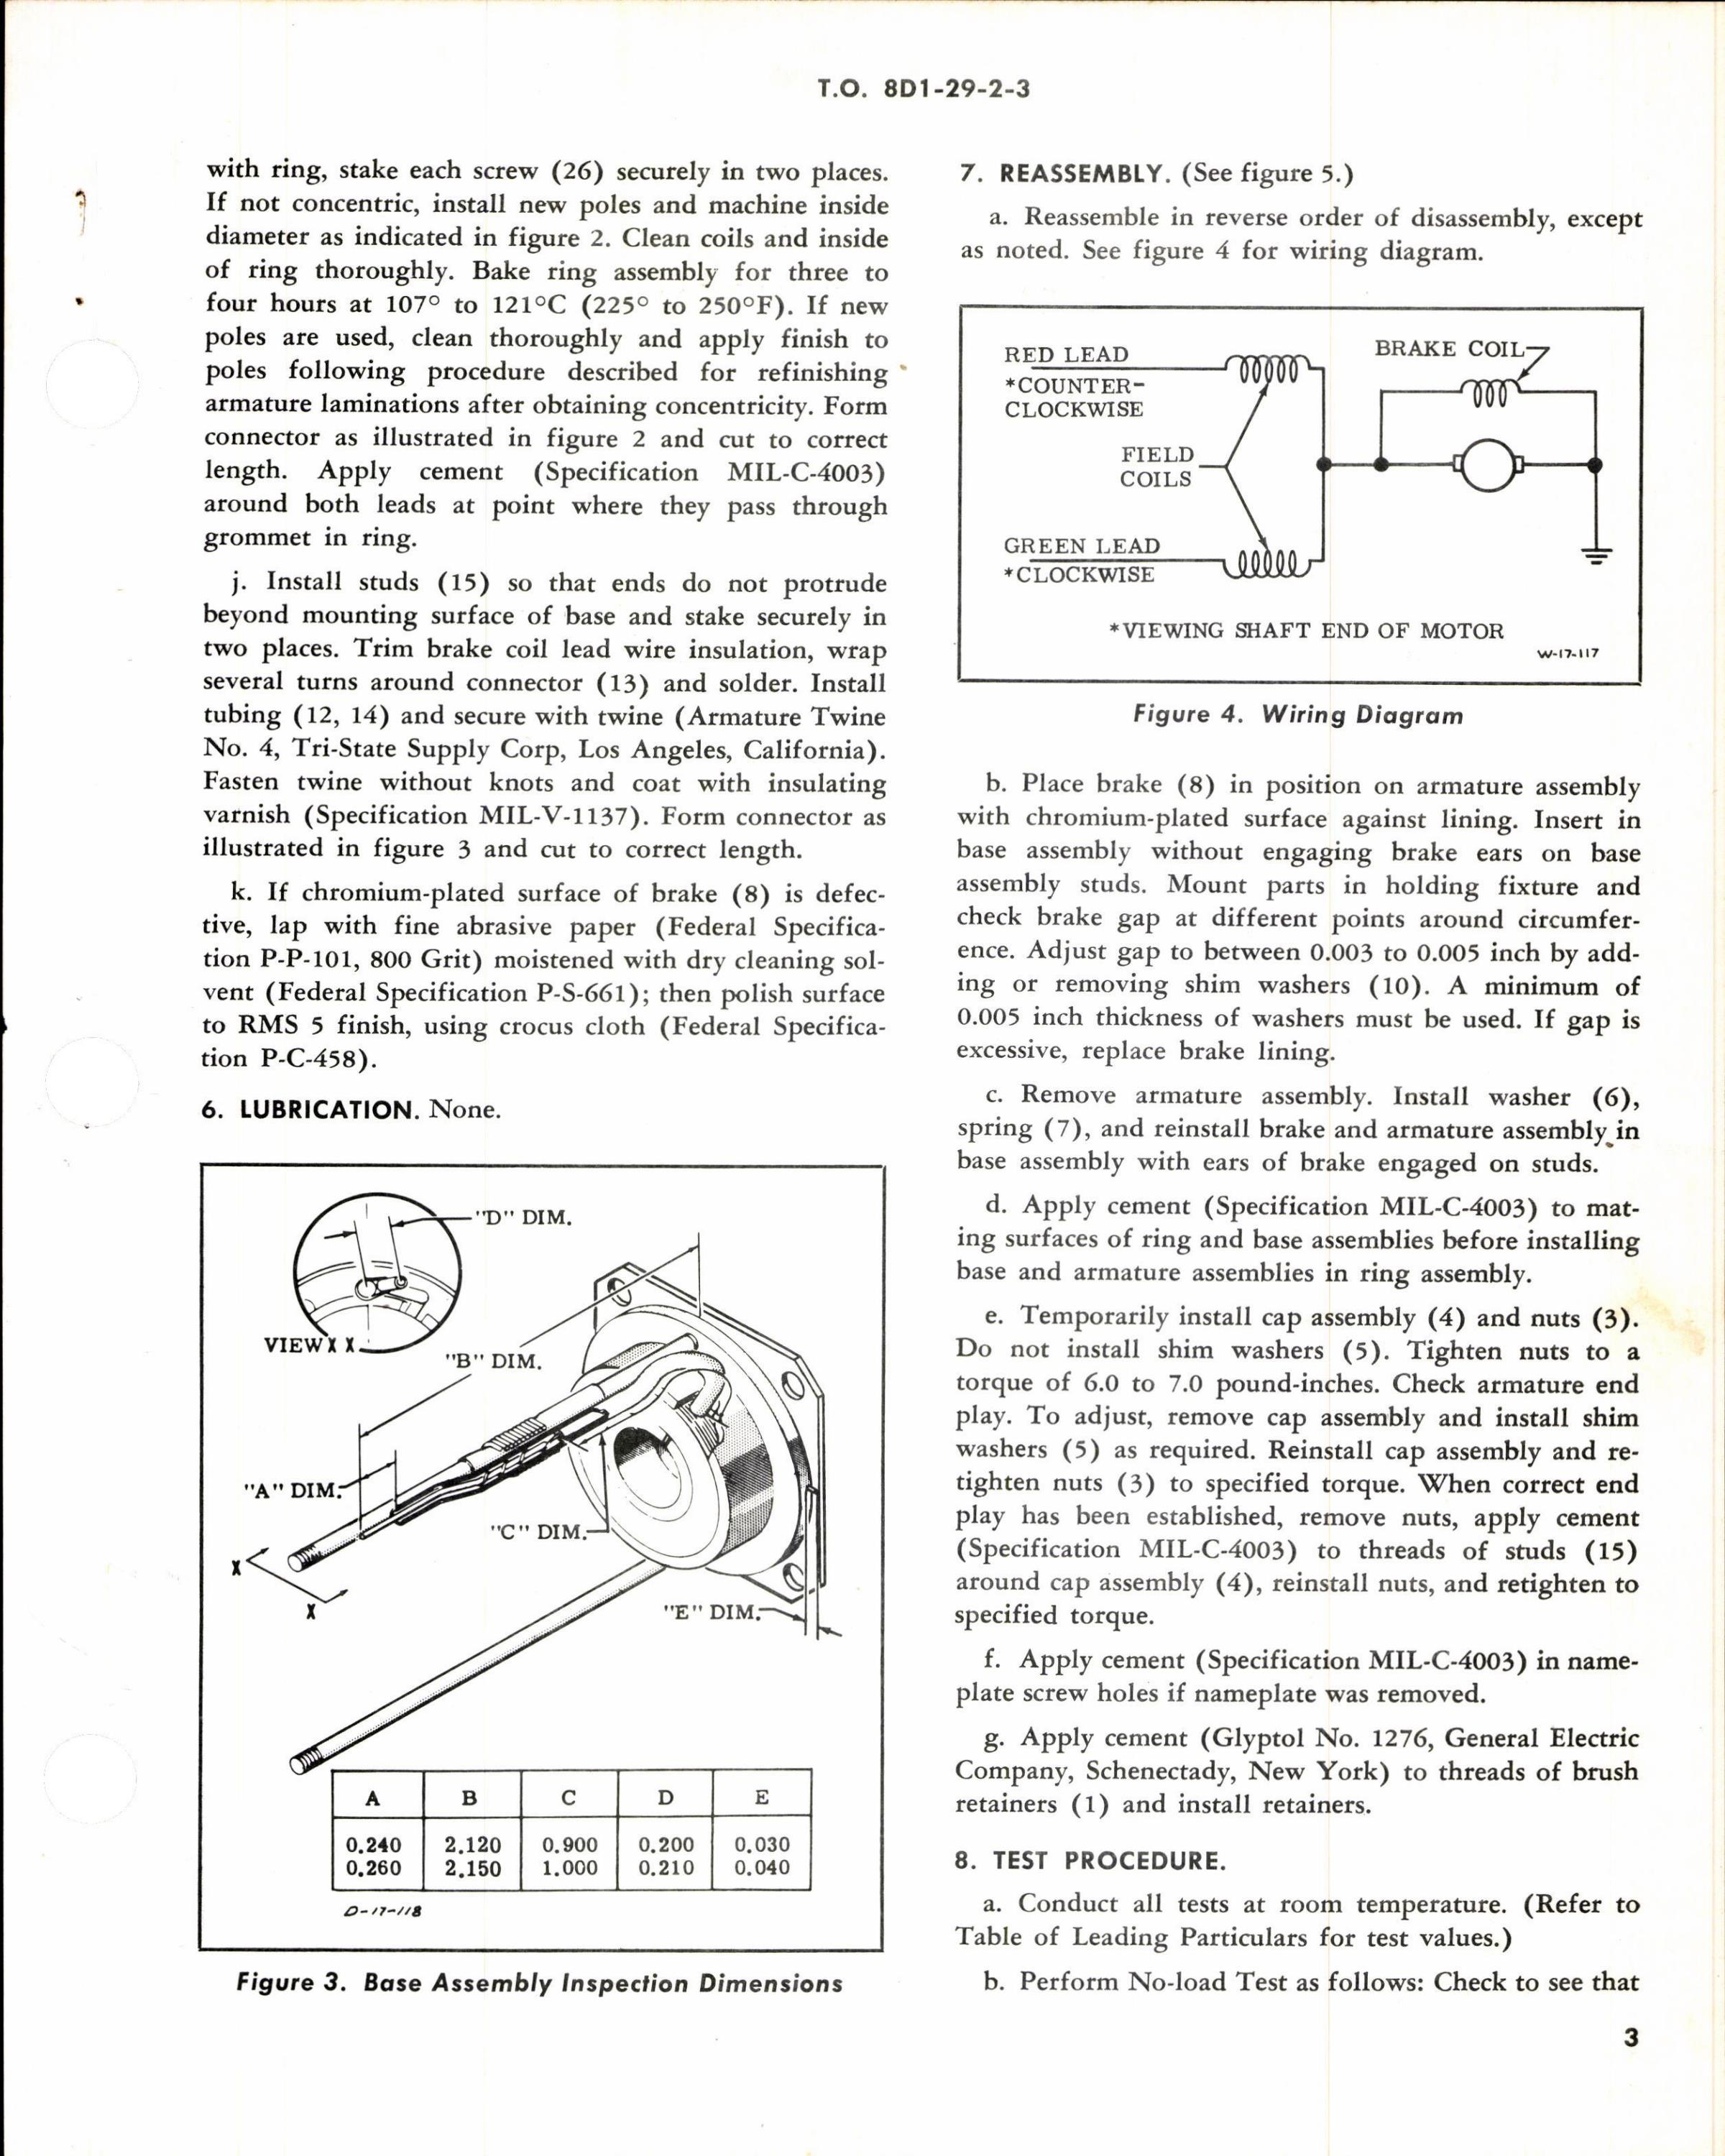 Sample page 3 from AirCorps Library document: Overhaul Instructions with Parts Breakdown for Direct Current Motor Model DCM15-52, Part No 26976